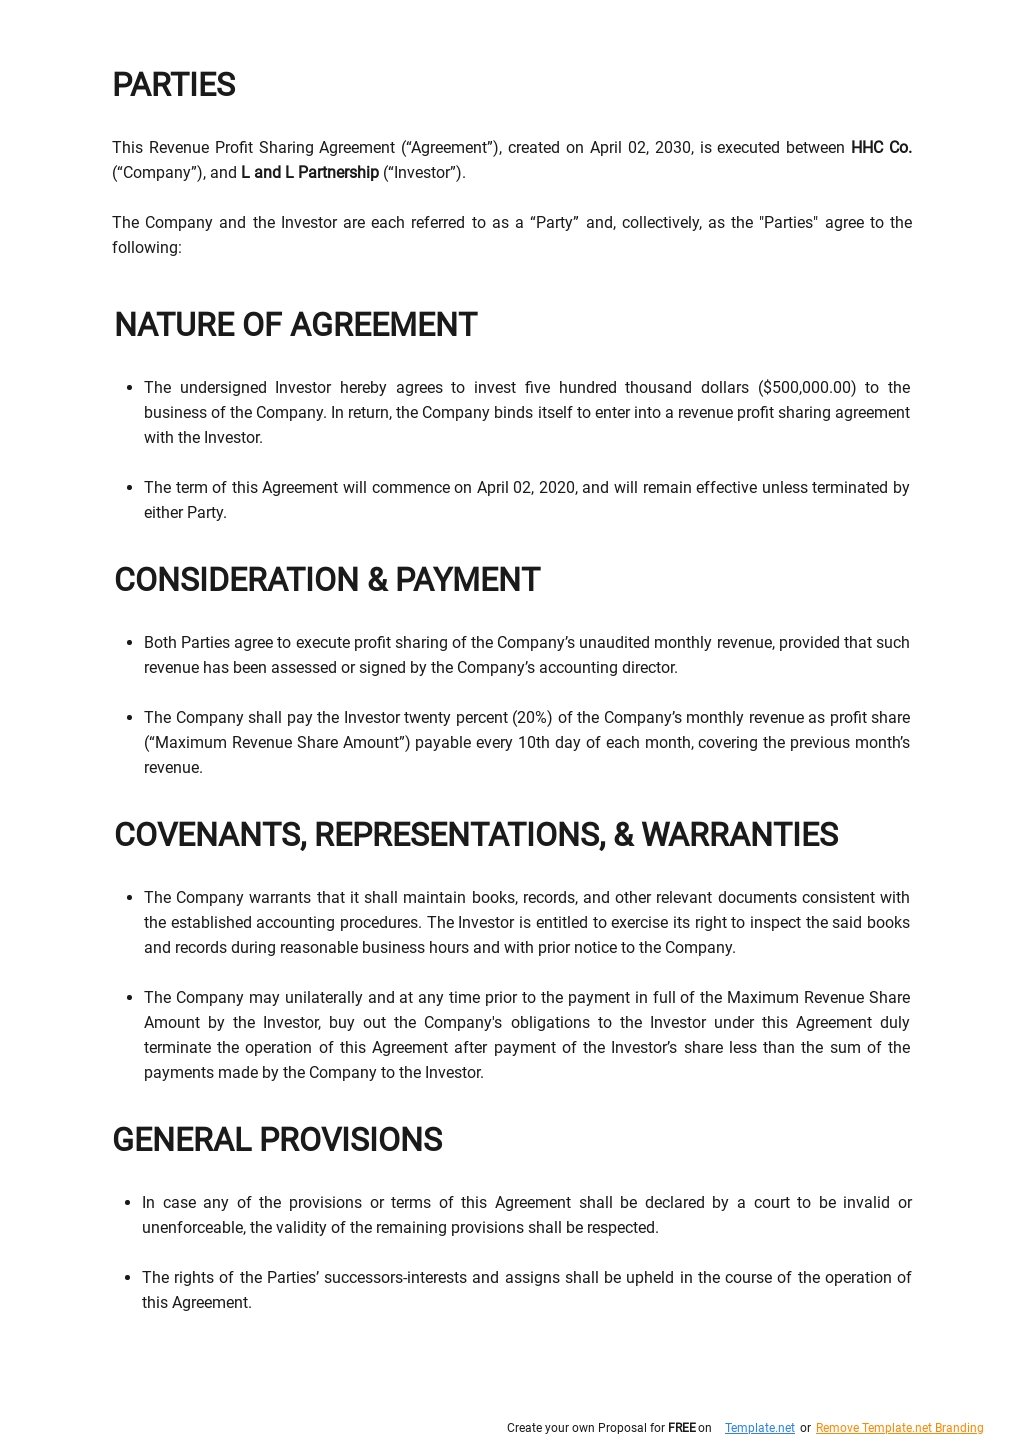 Revenue Profit Sharing Agreement Template in Google Docs, Word